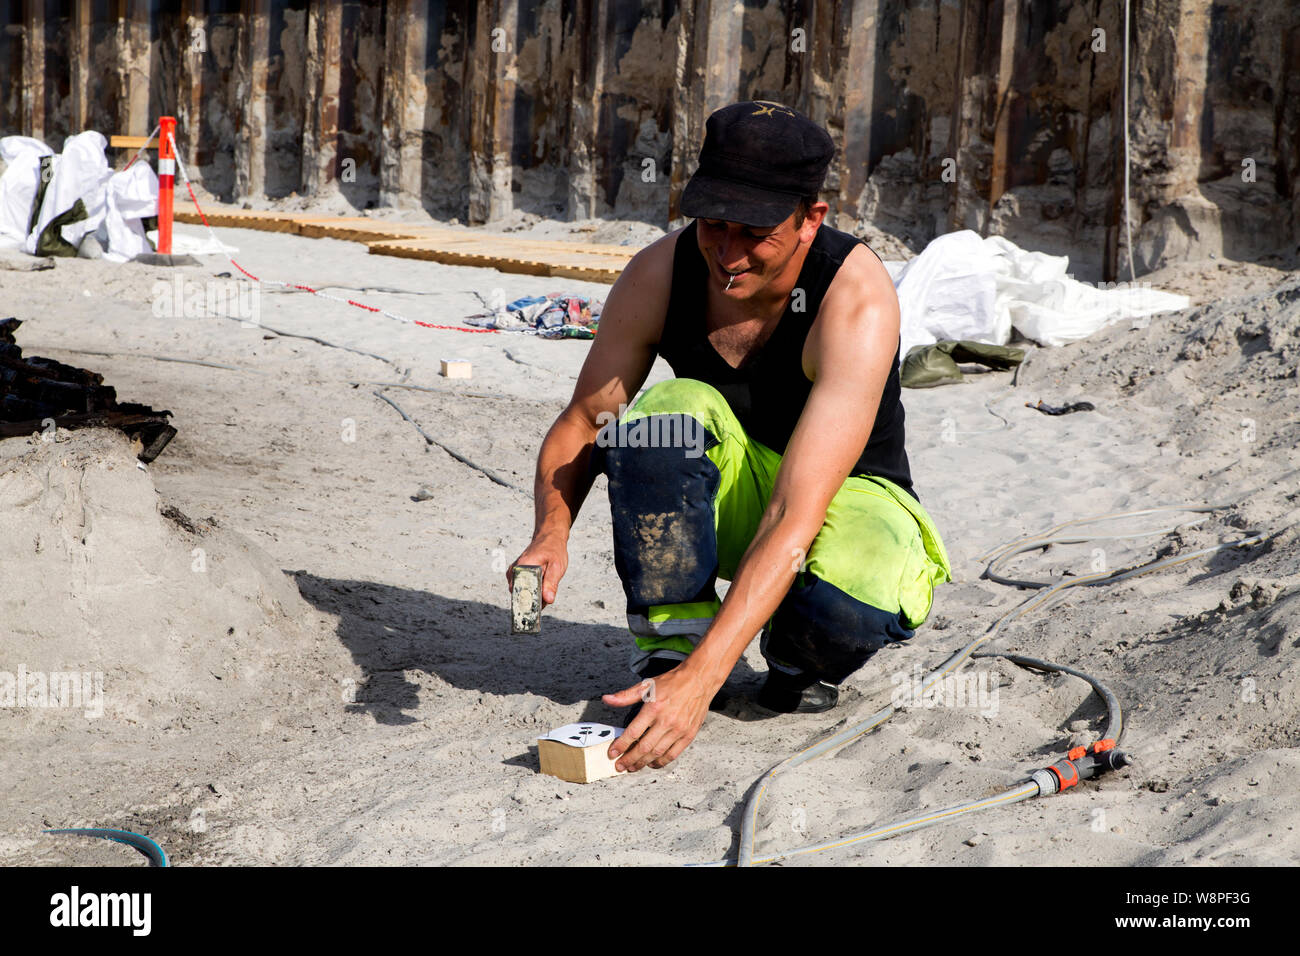 Archaeologist Jeppe Faerch-Jensen, Museum of South-East Denmark, is placing markers in the sand as preparation for drone photography of the large 500 years old ship wreck which has just has been excavated at a building site near Koege, Denmark. (Photo by Ole Jensen/Alamy) Stock Photo